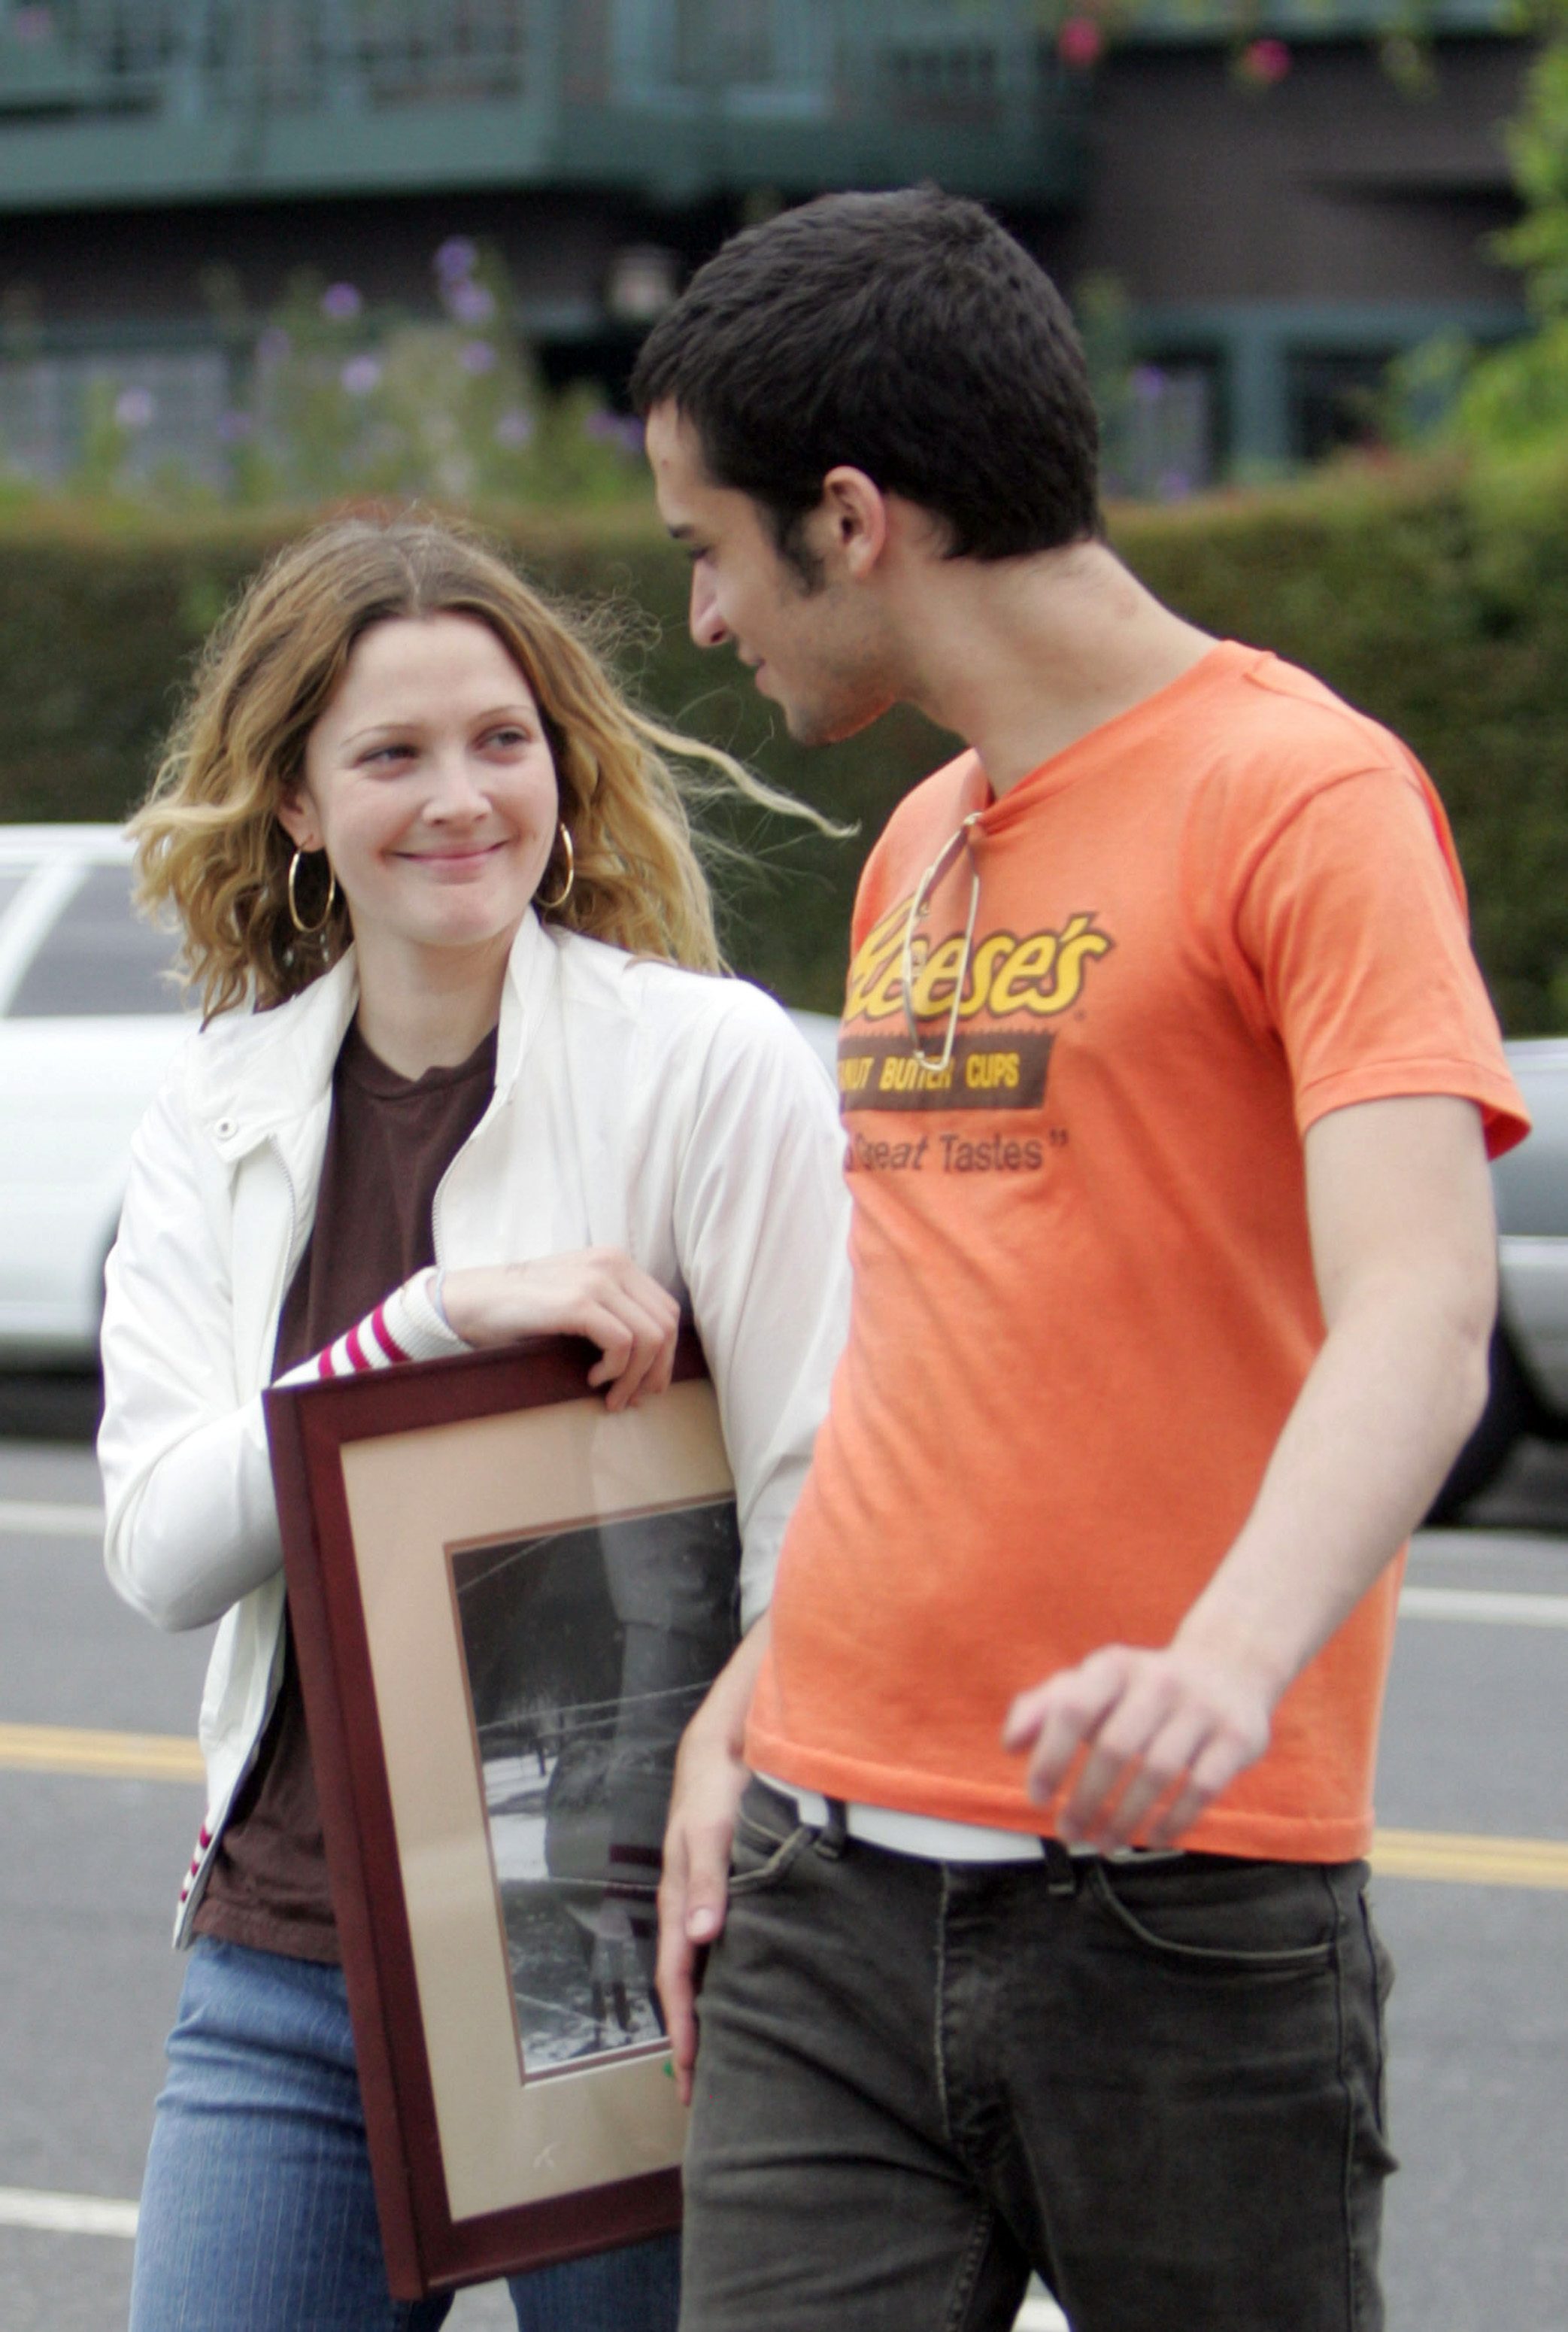 They&#x27;re crossing the street and smiling at each other; she&#x27;s holding a framed photo and wearing a sweater and jeans; he&#x27;s in jeans and a Reese&#x27;s T-shirt